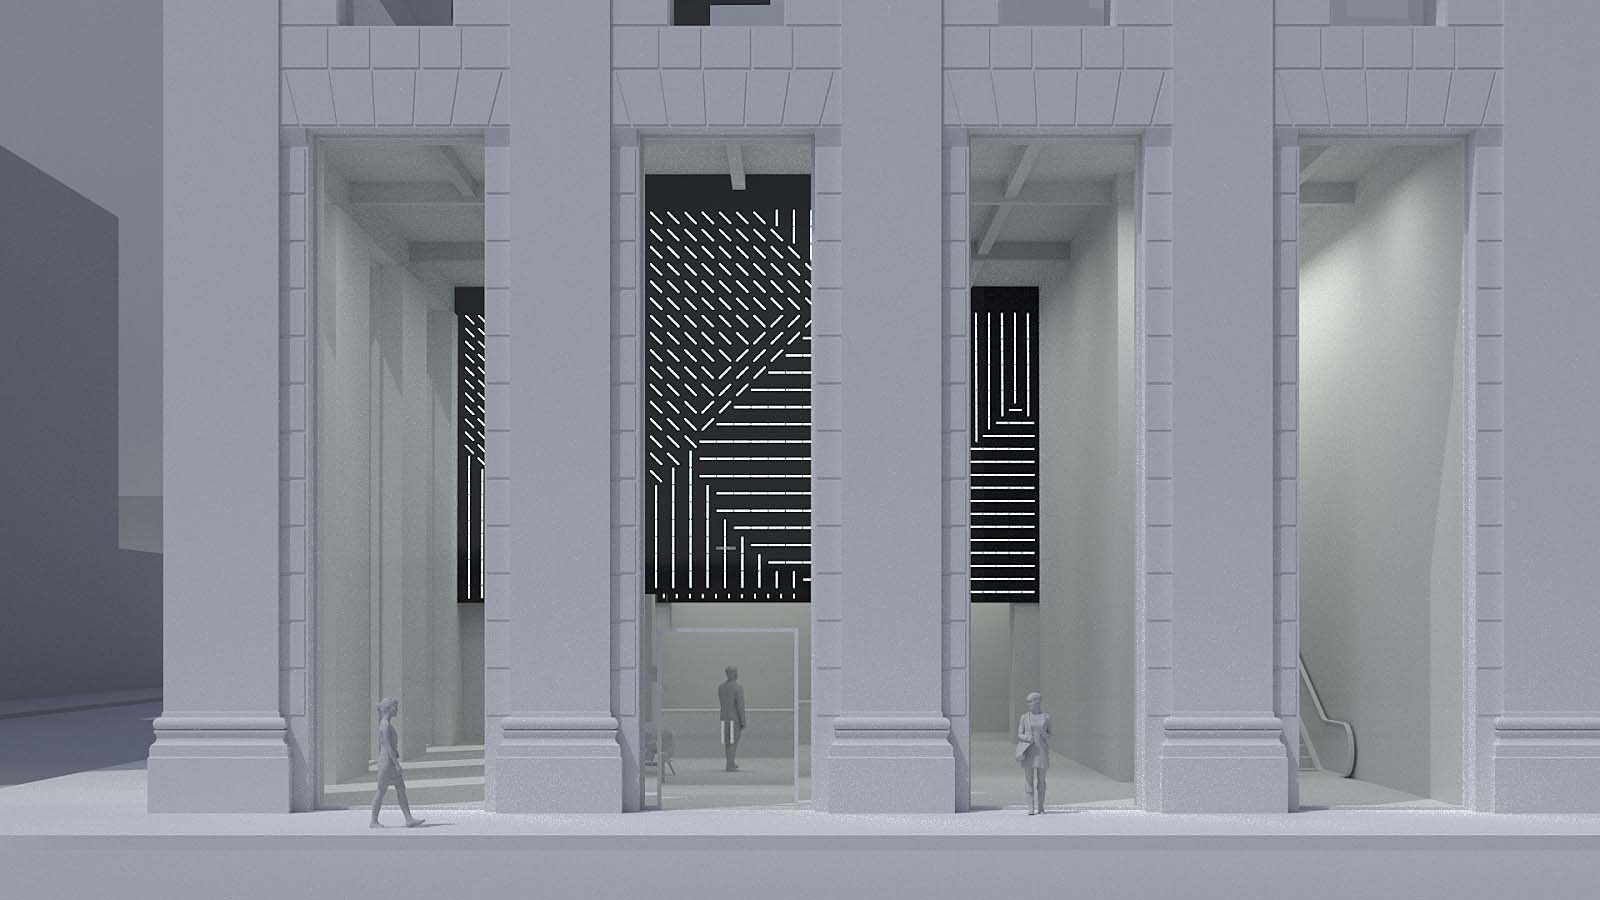 Exterior view of space with black and white digital content visible in between pillars